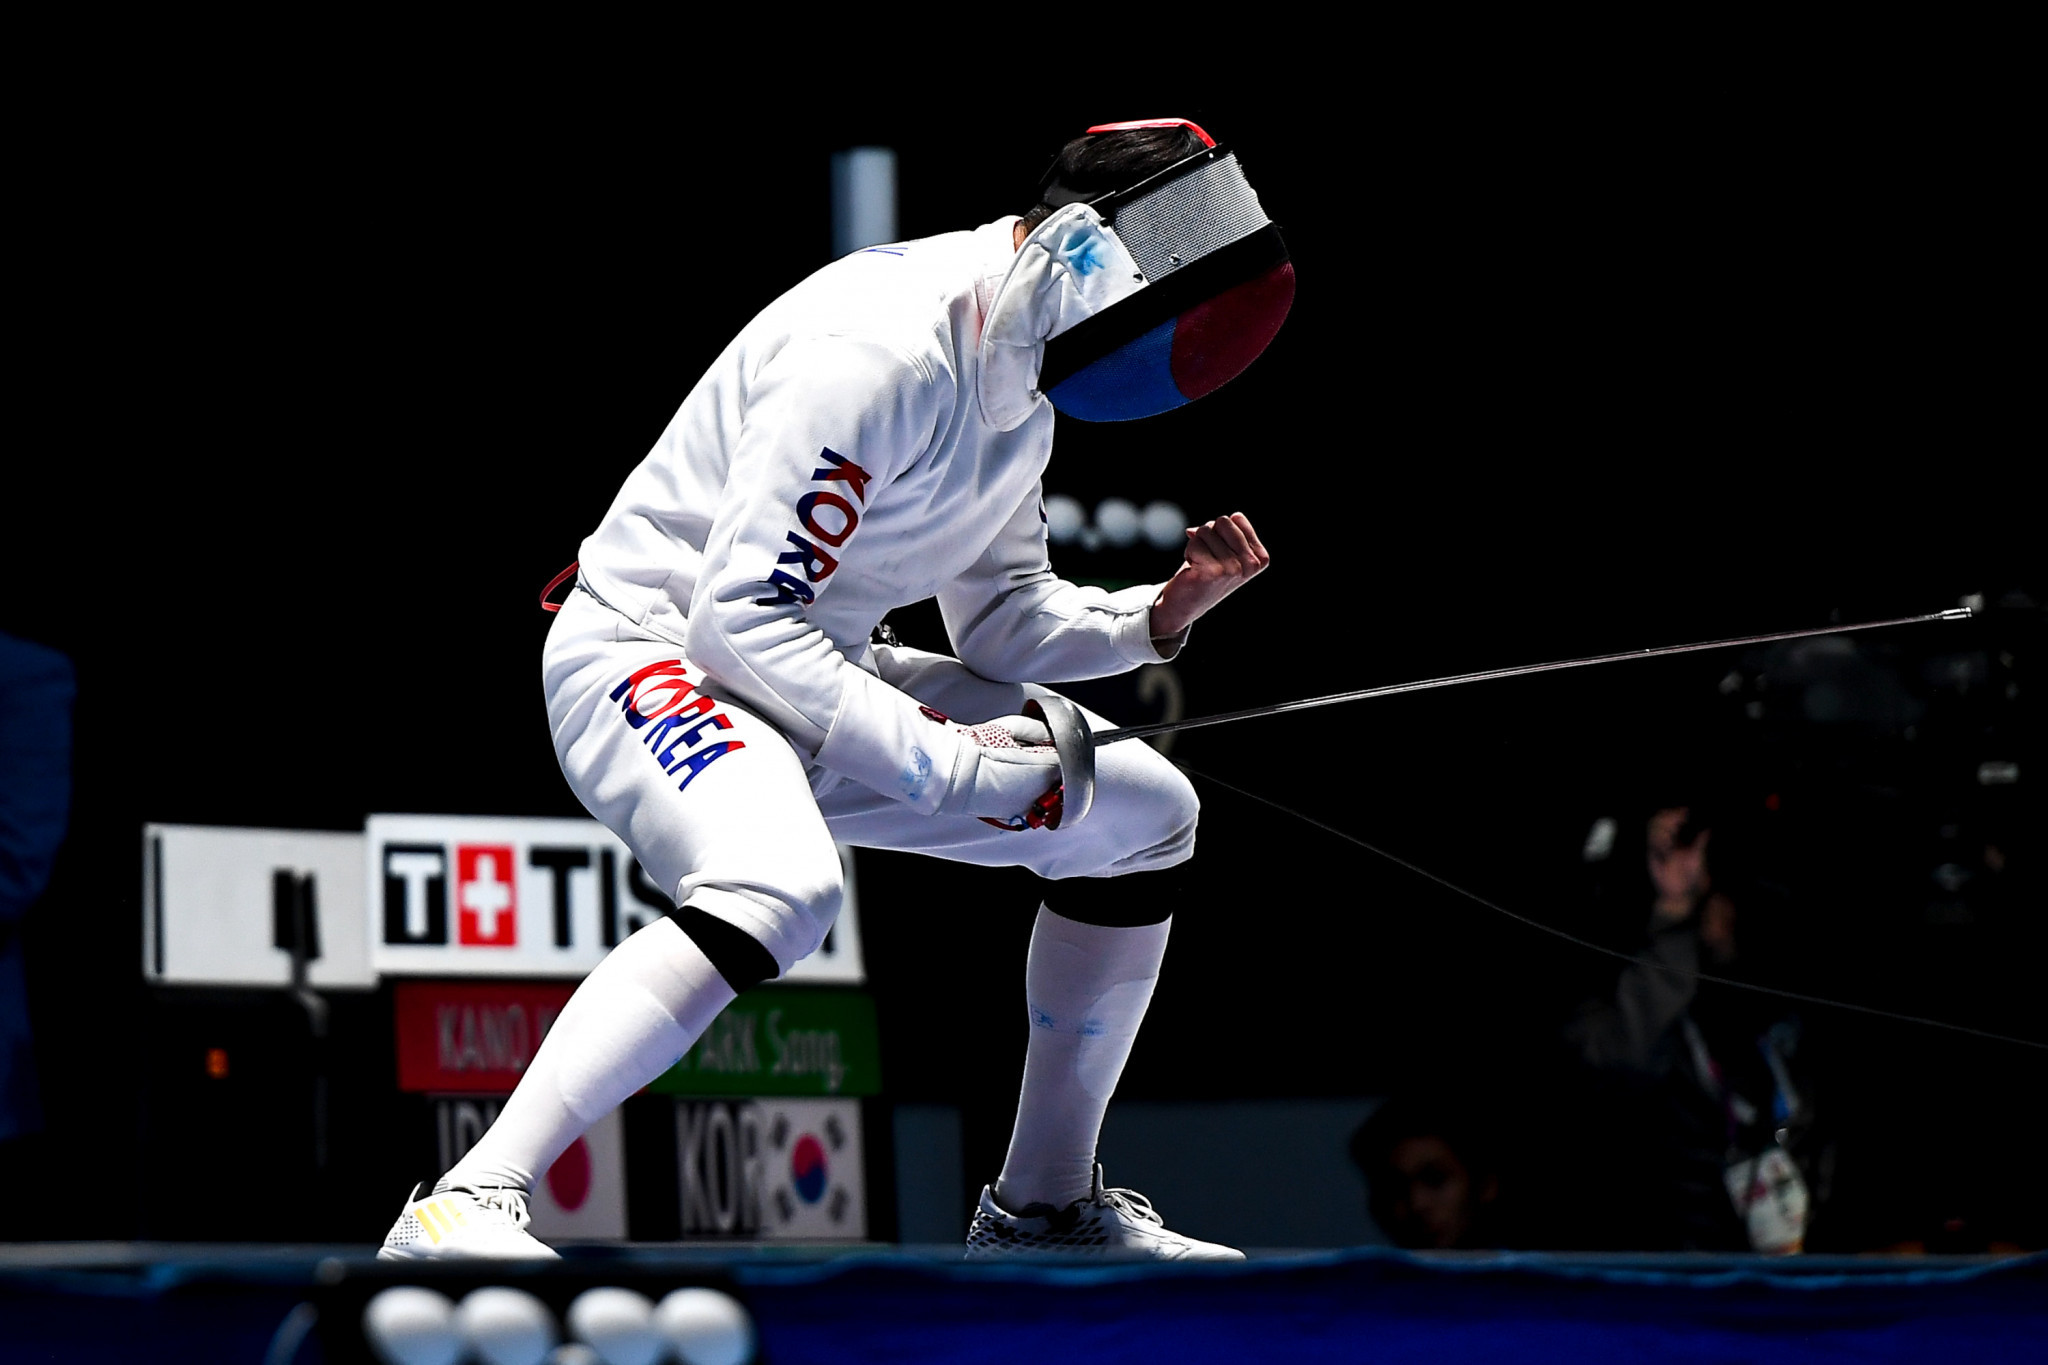 Rio 2016 Olympic fencing champion Park Sang-young claimed the postponement gives him 